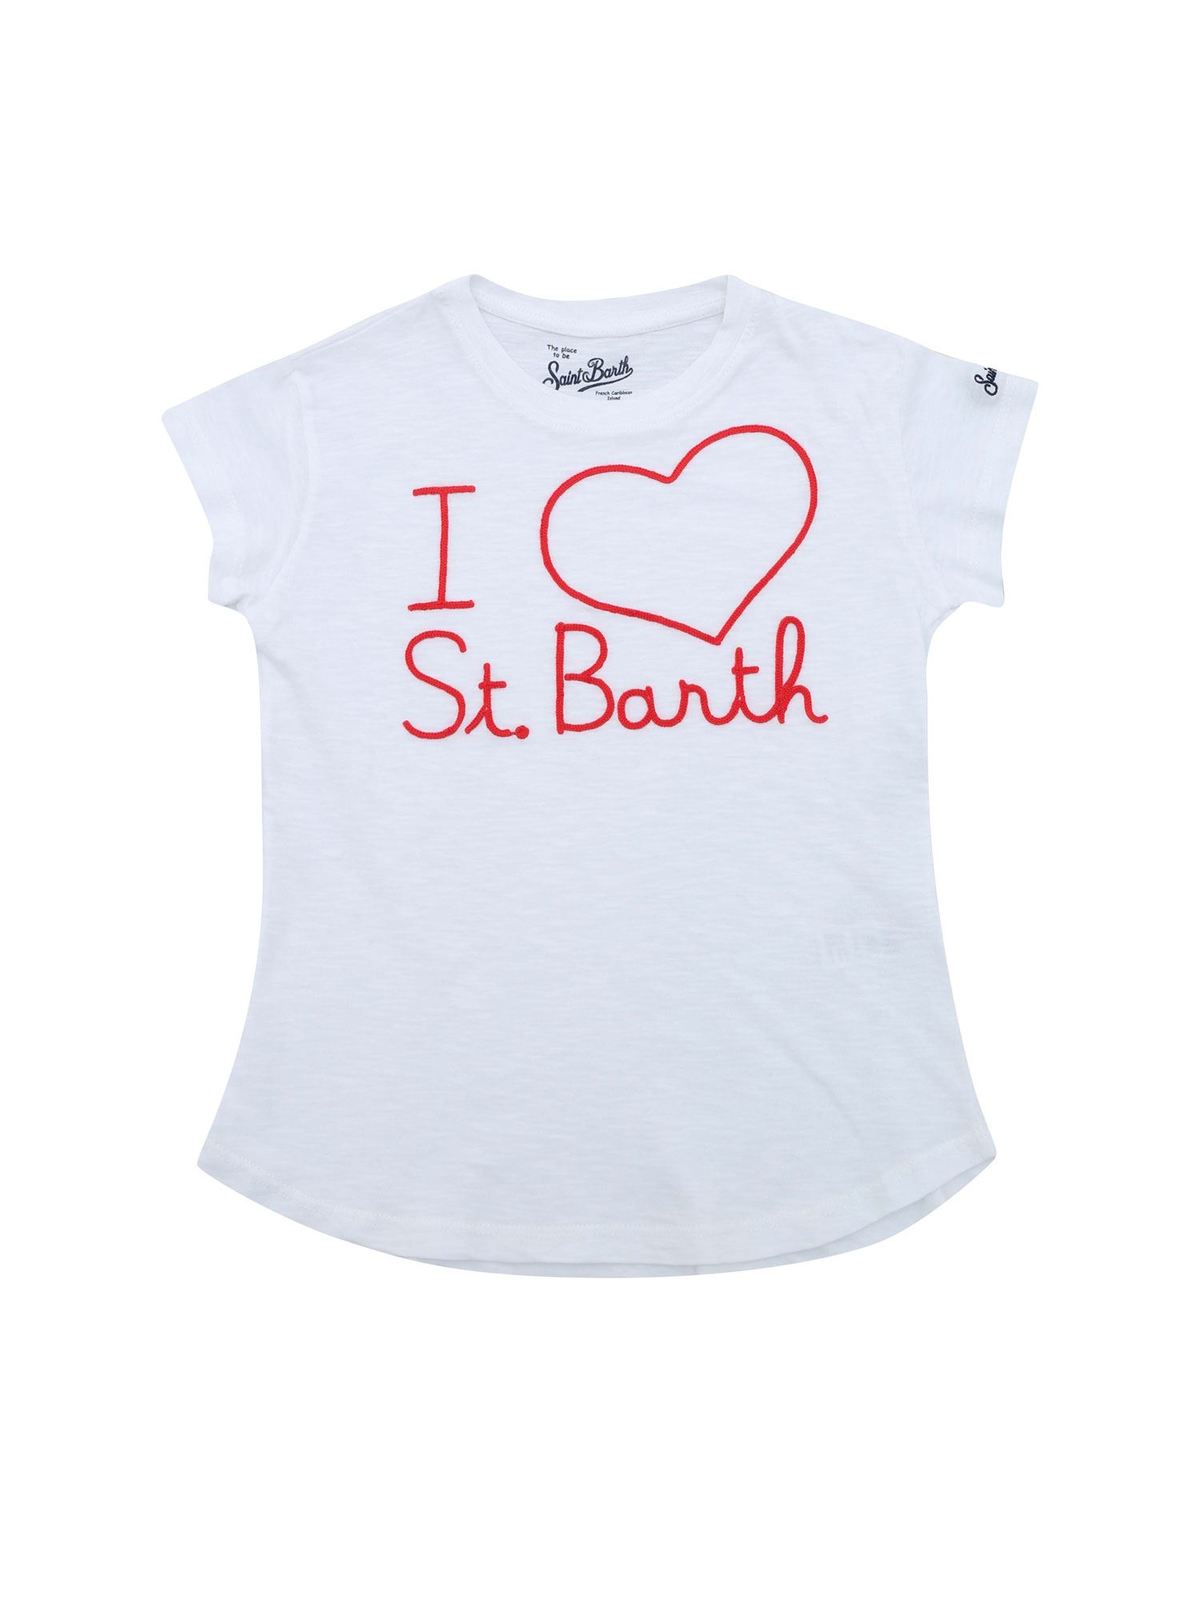 MC2 SAINT BARTH EMMA T-SHIRT IN WHITE AND RED